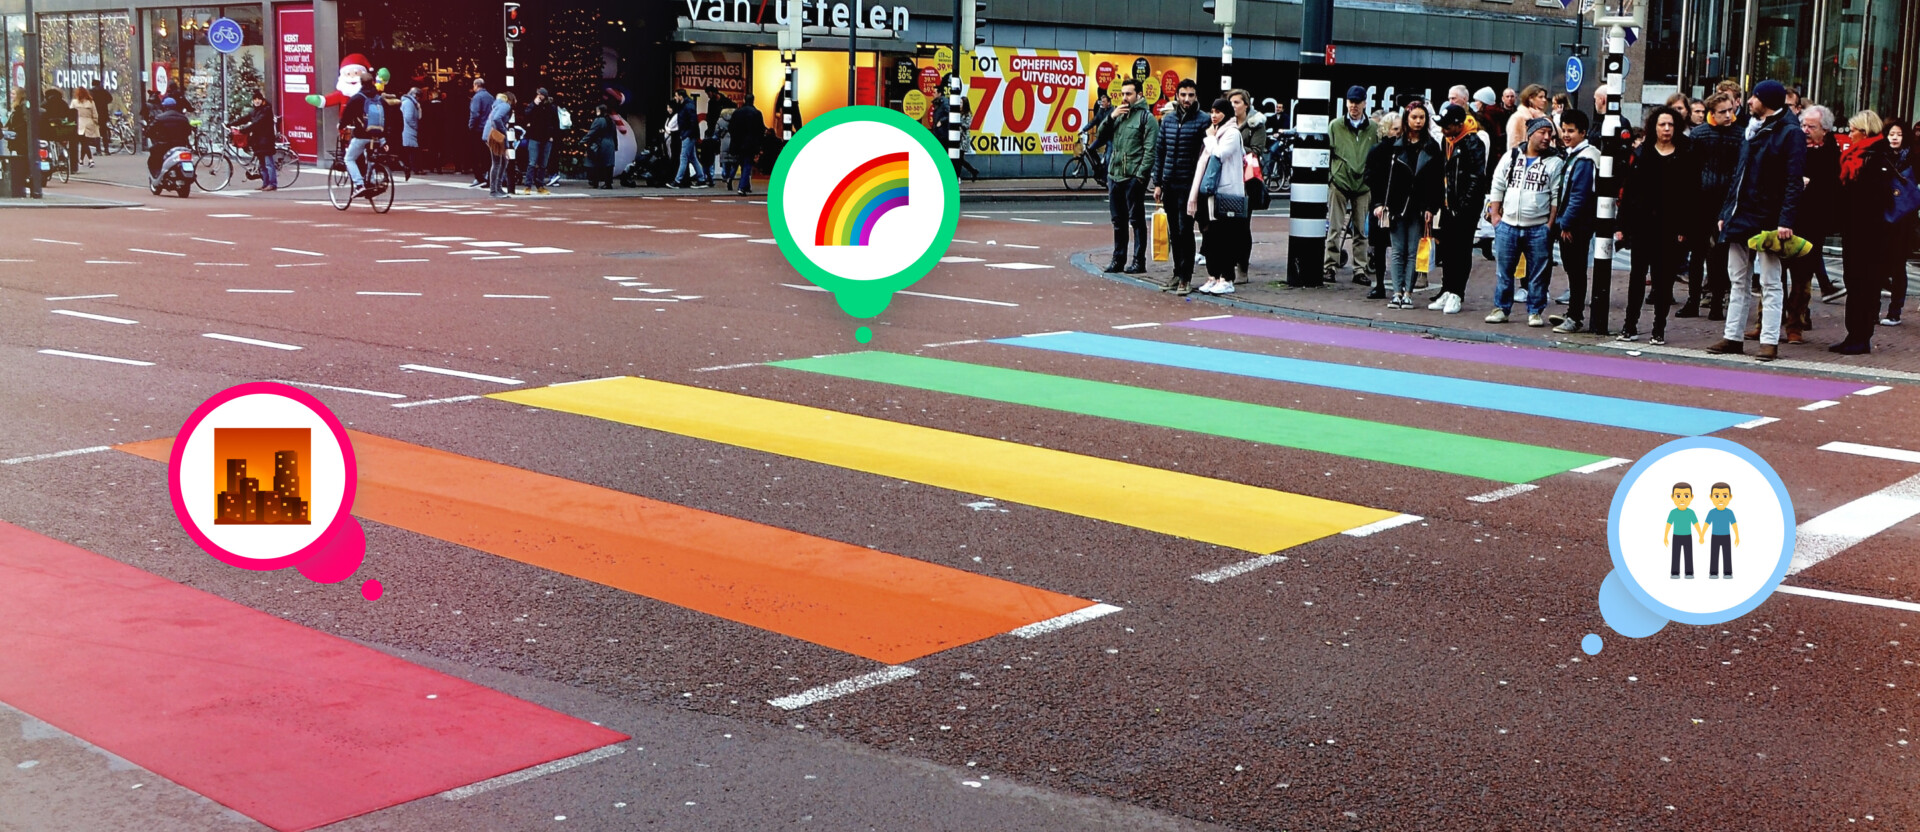 The Most LGBT-Friendly Countries in The World